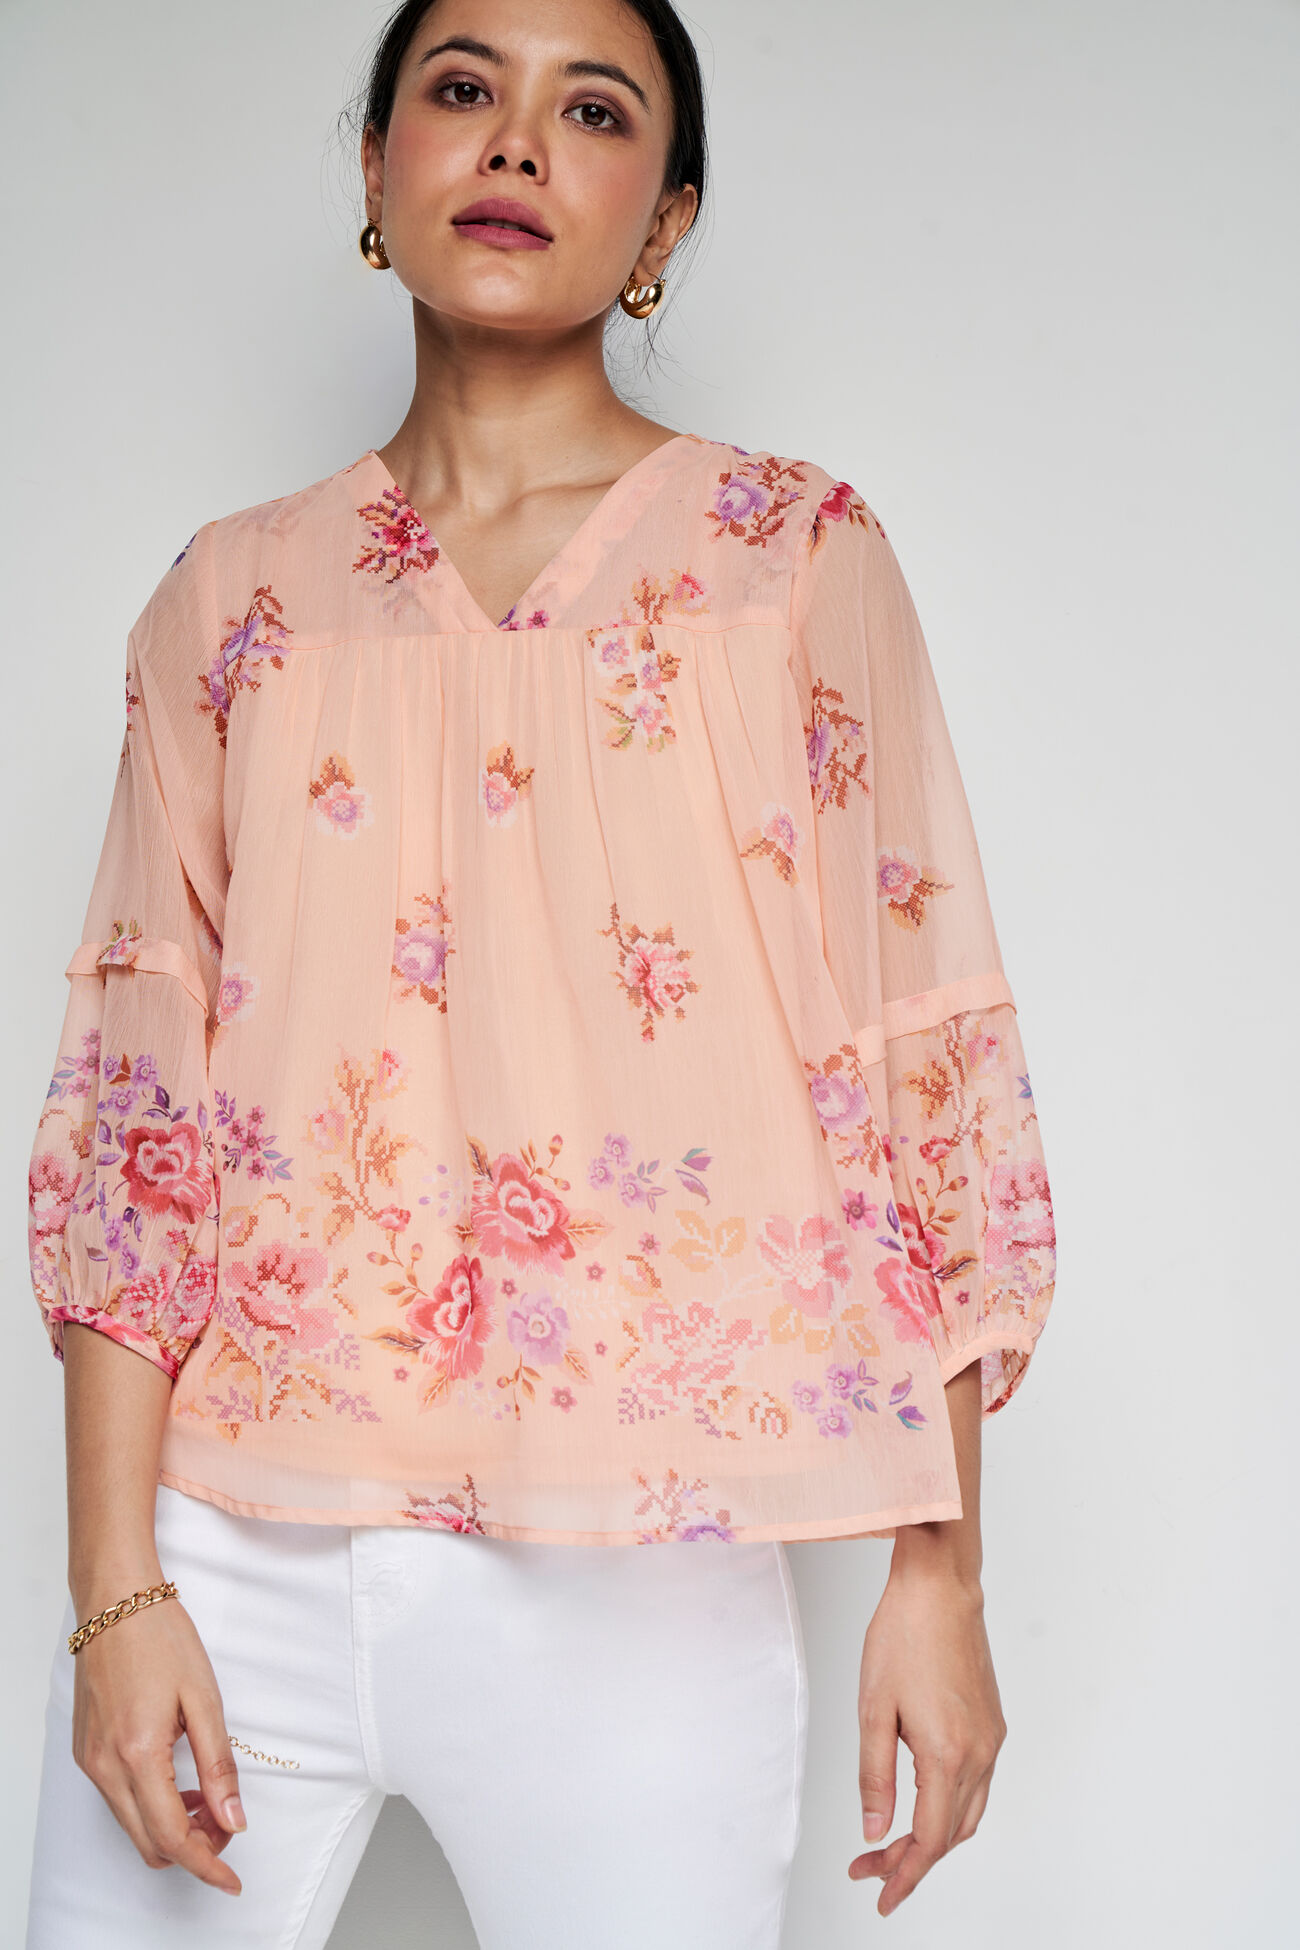 Sunup Floral Top, Peach, image 5